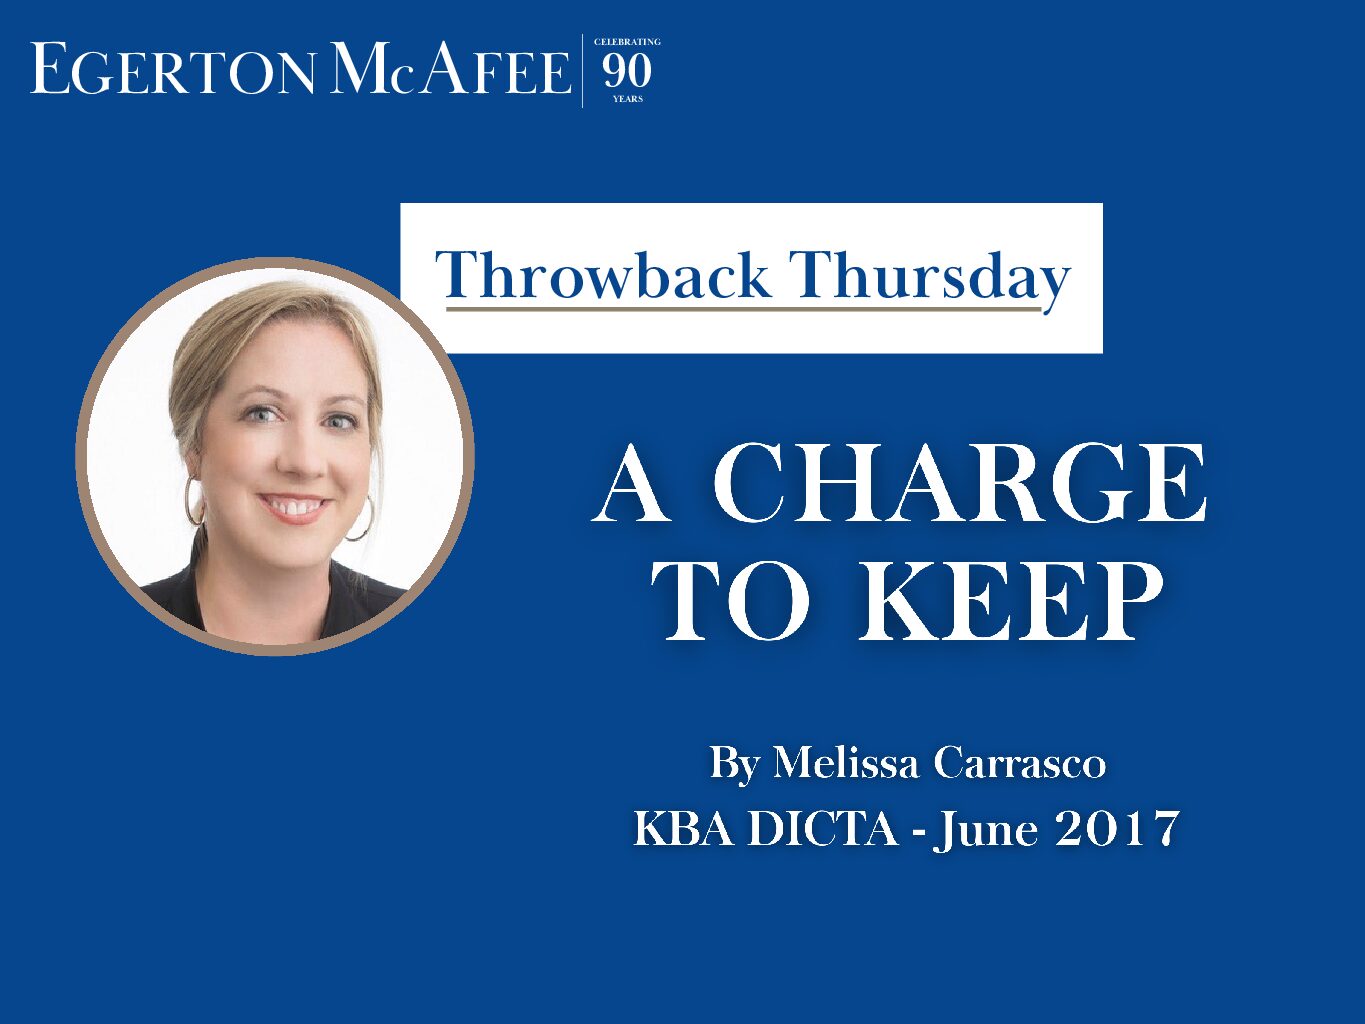 Throwback Thursday – A CHARGE TO KEEP by Melissa Carrasco